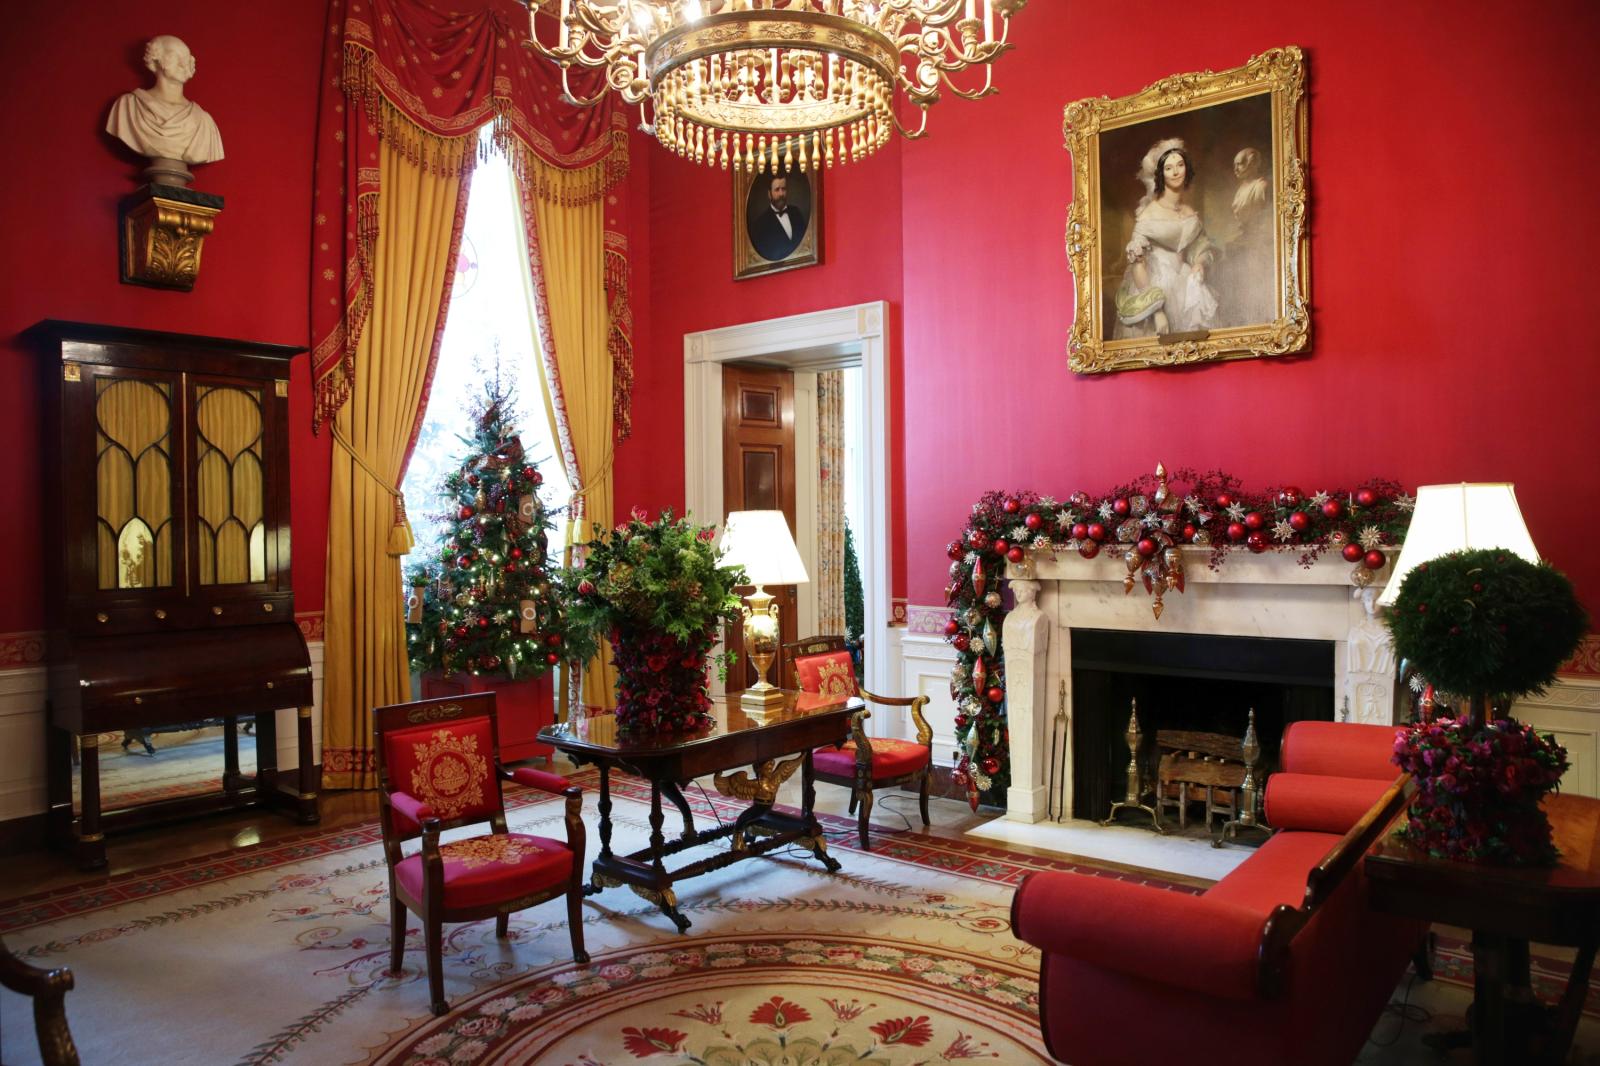 https://www.yizuo-media.com/albums/albums/userpics/10003/Red_Room_white_house.jpg